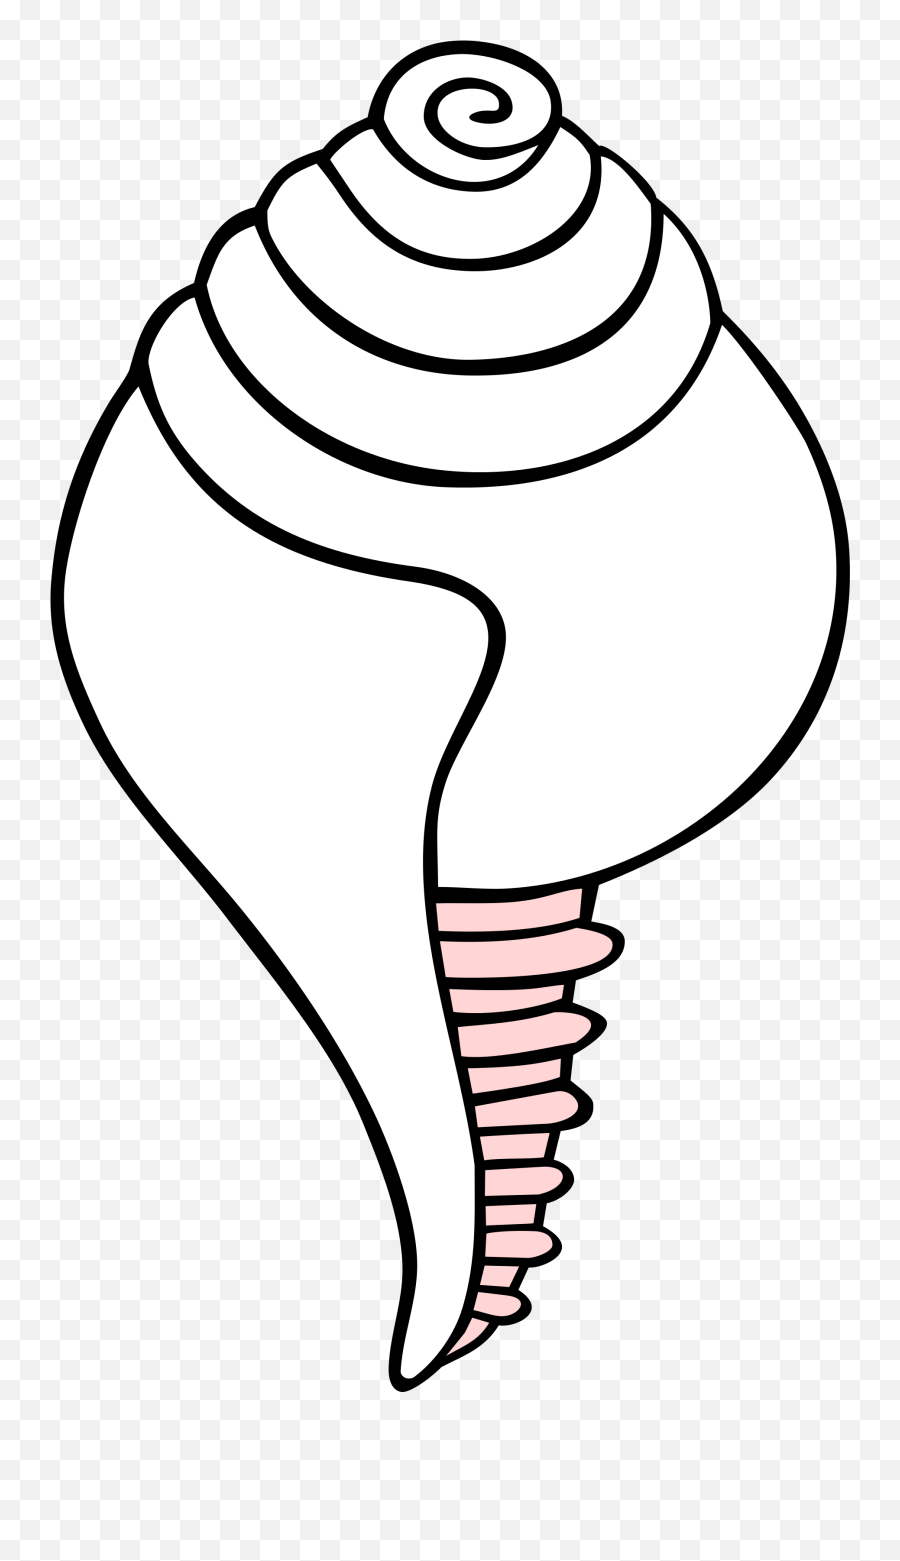 Shell Clipart Conch Shell Conch - Outline Image Of Conch Emoji,Conch Shell Emoji